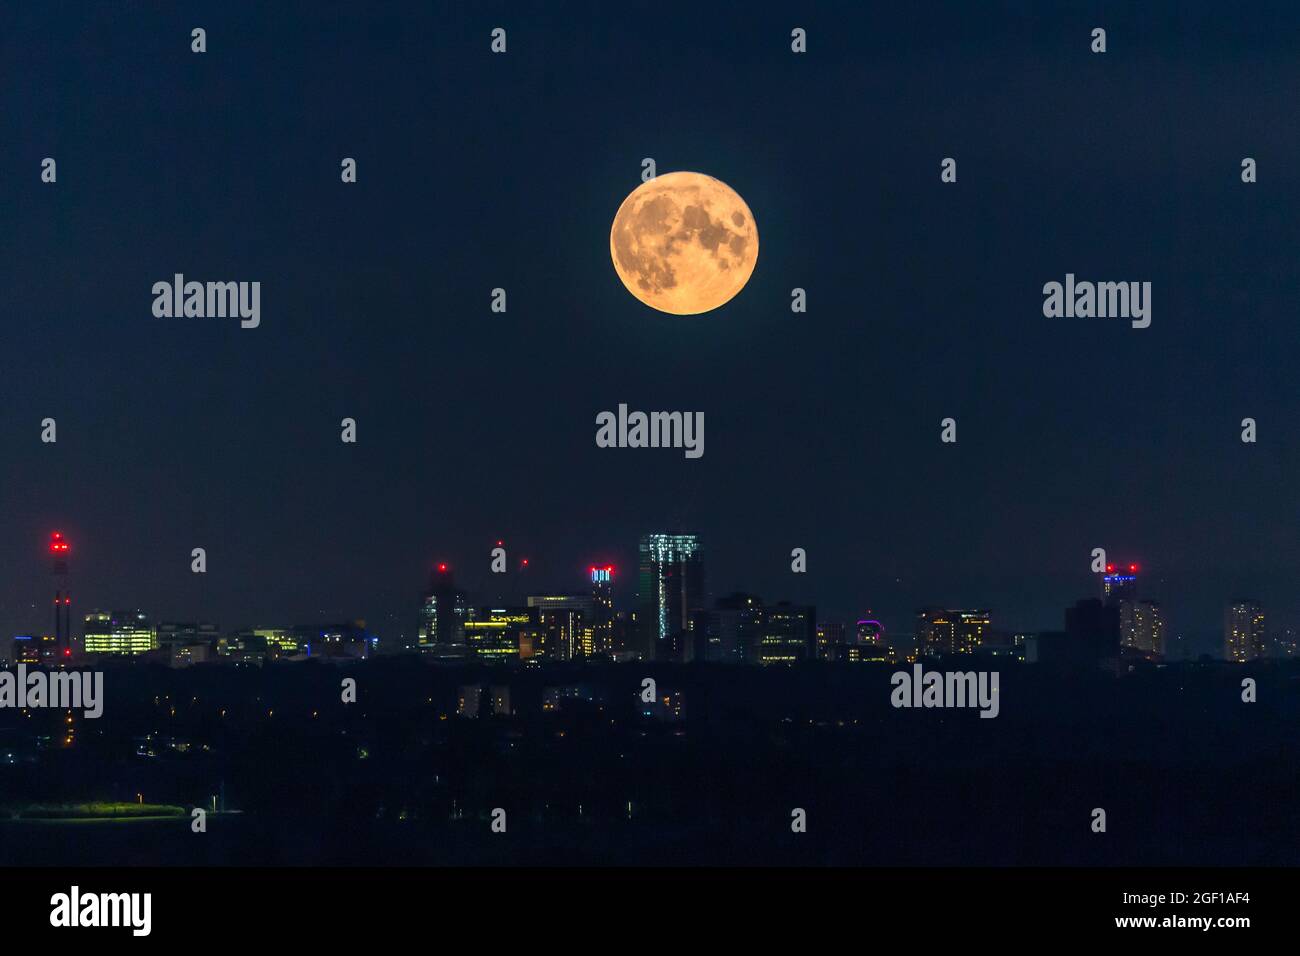 Birmingham, UK. 22nd Aug, 2021. The full moon hangs over the city lights of Birmingham, UK, like a giant lamp. This August full moon is nicknamed the 'sturgeon' moon. Credit: Peter Lopeman/Alamy Live News Stock Photo